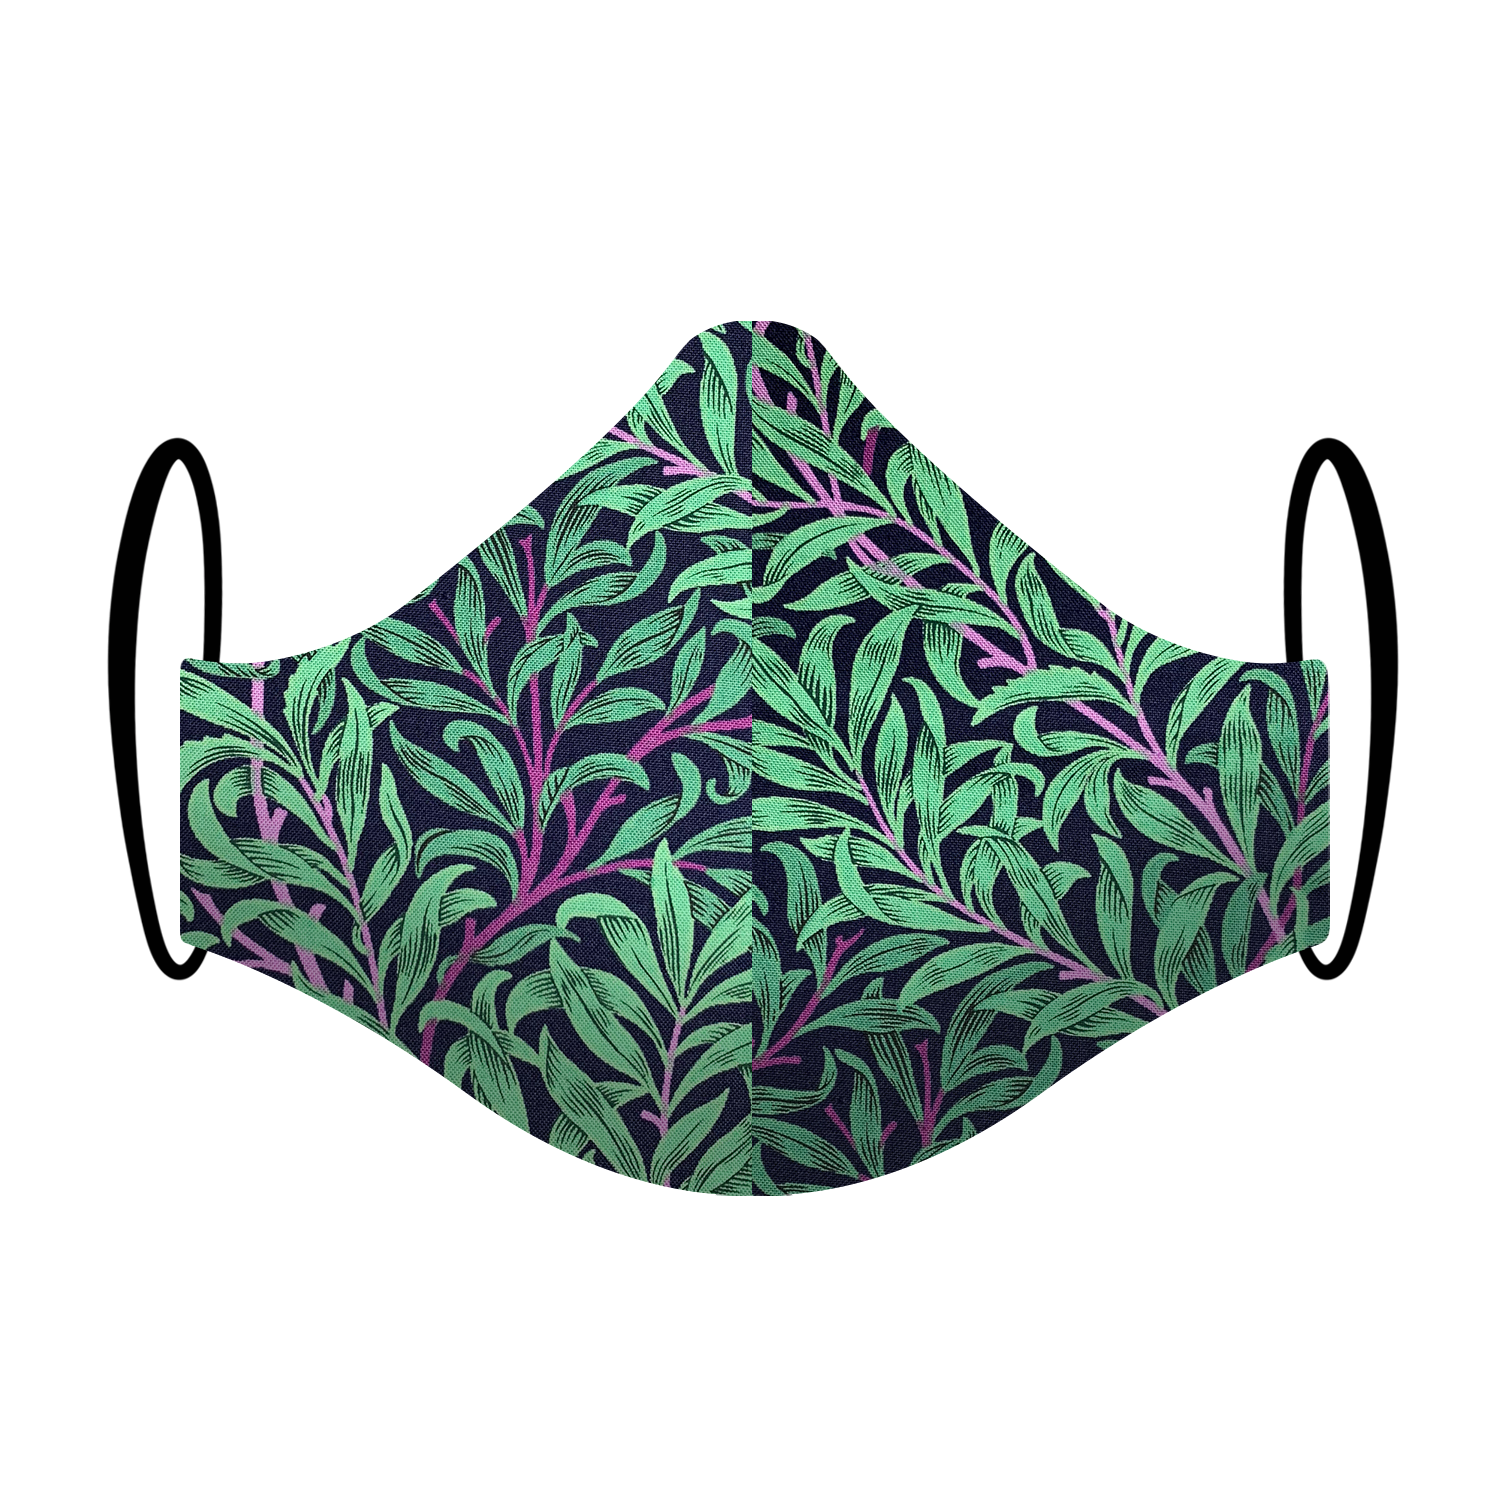 Triple layered face mask made in Melbourne Australia from cotton and poplin featuring a unique jungle vine print